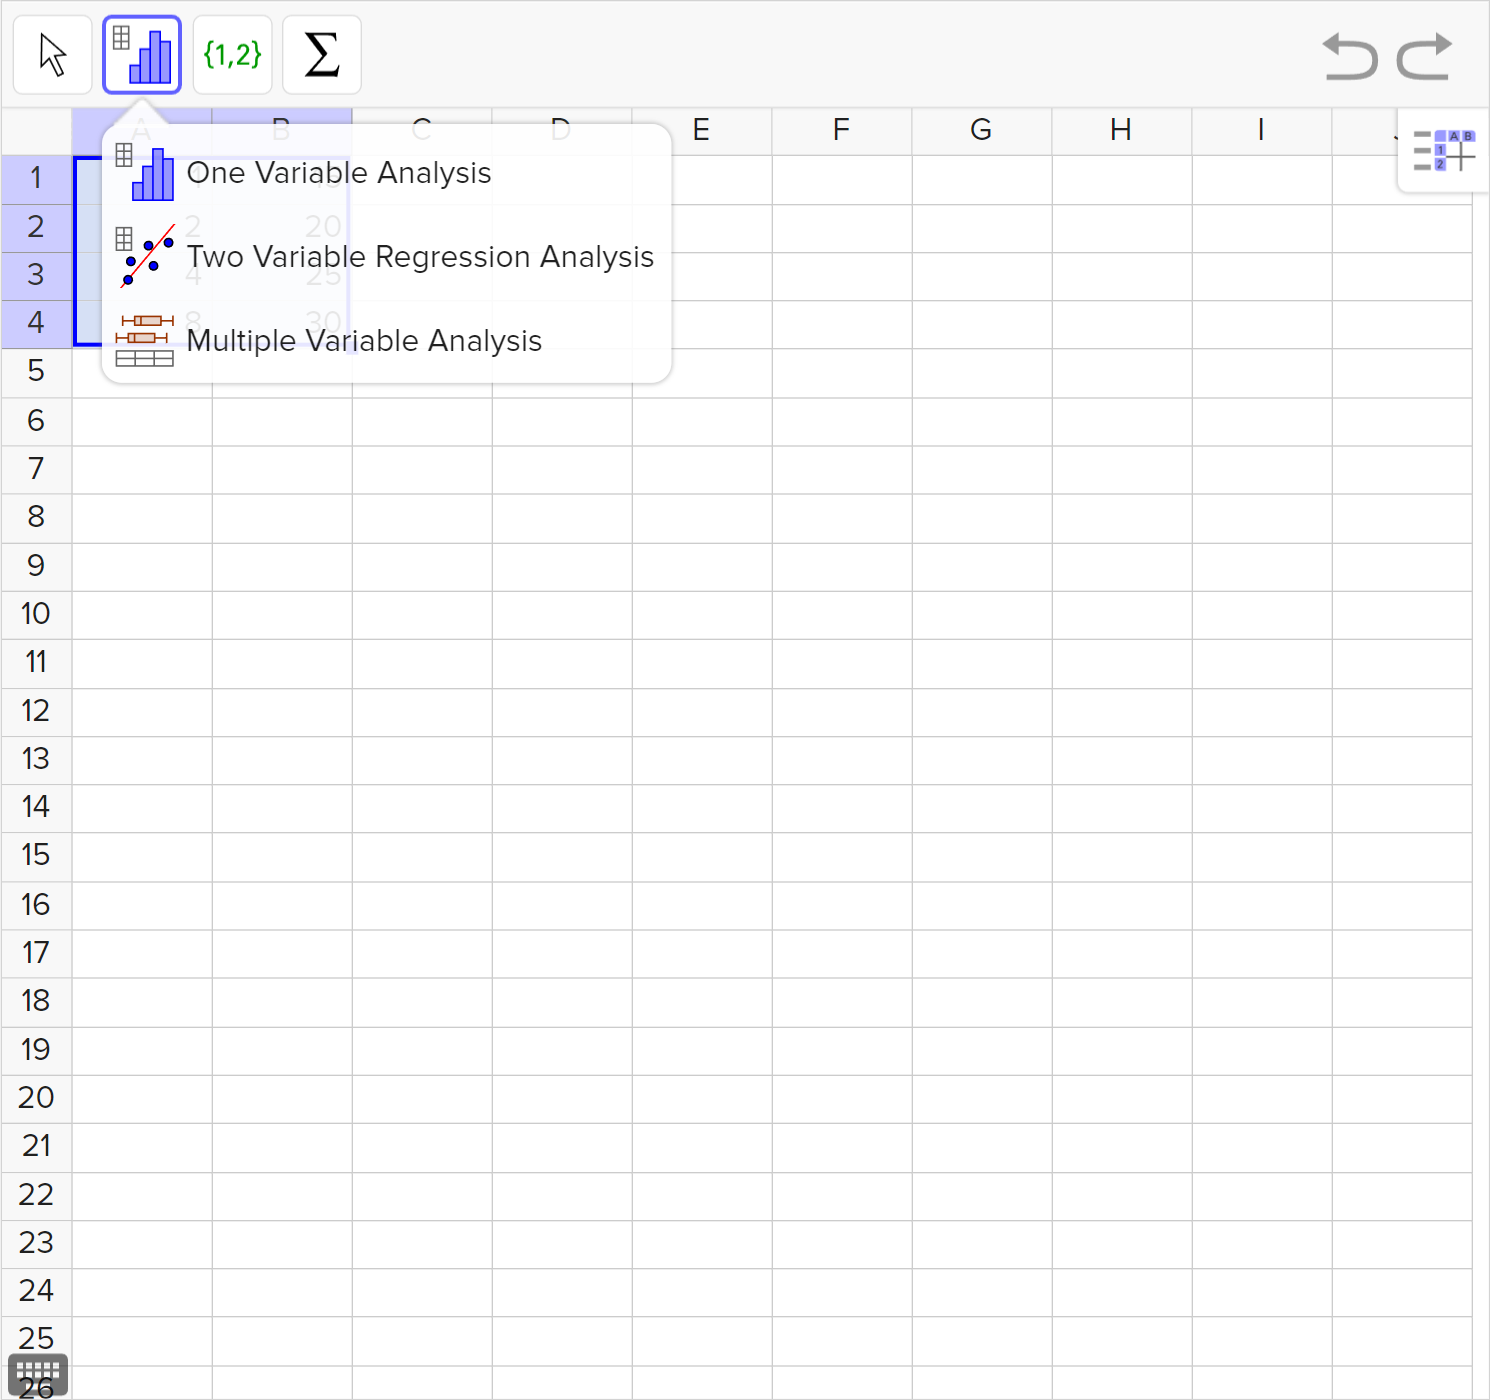 A screenshot of the GeoGebra statistics tool showing the data 1, 2, 4, and 8 entered in column A, rows 1 to 4, and 15, 20, 25, and 30 entered in column B, rows 1 to 4. The cells from column A, rows 1 to 4, and column B, rows 1 to 4, are selected. The menu from the second leftmost icon is shown.